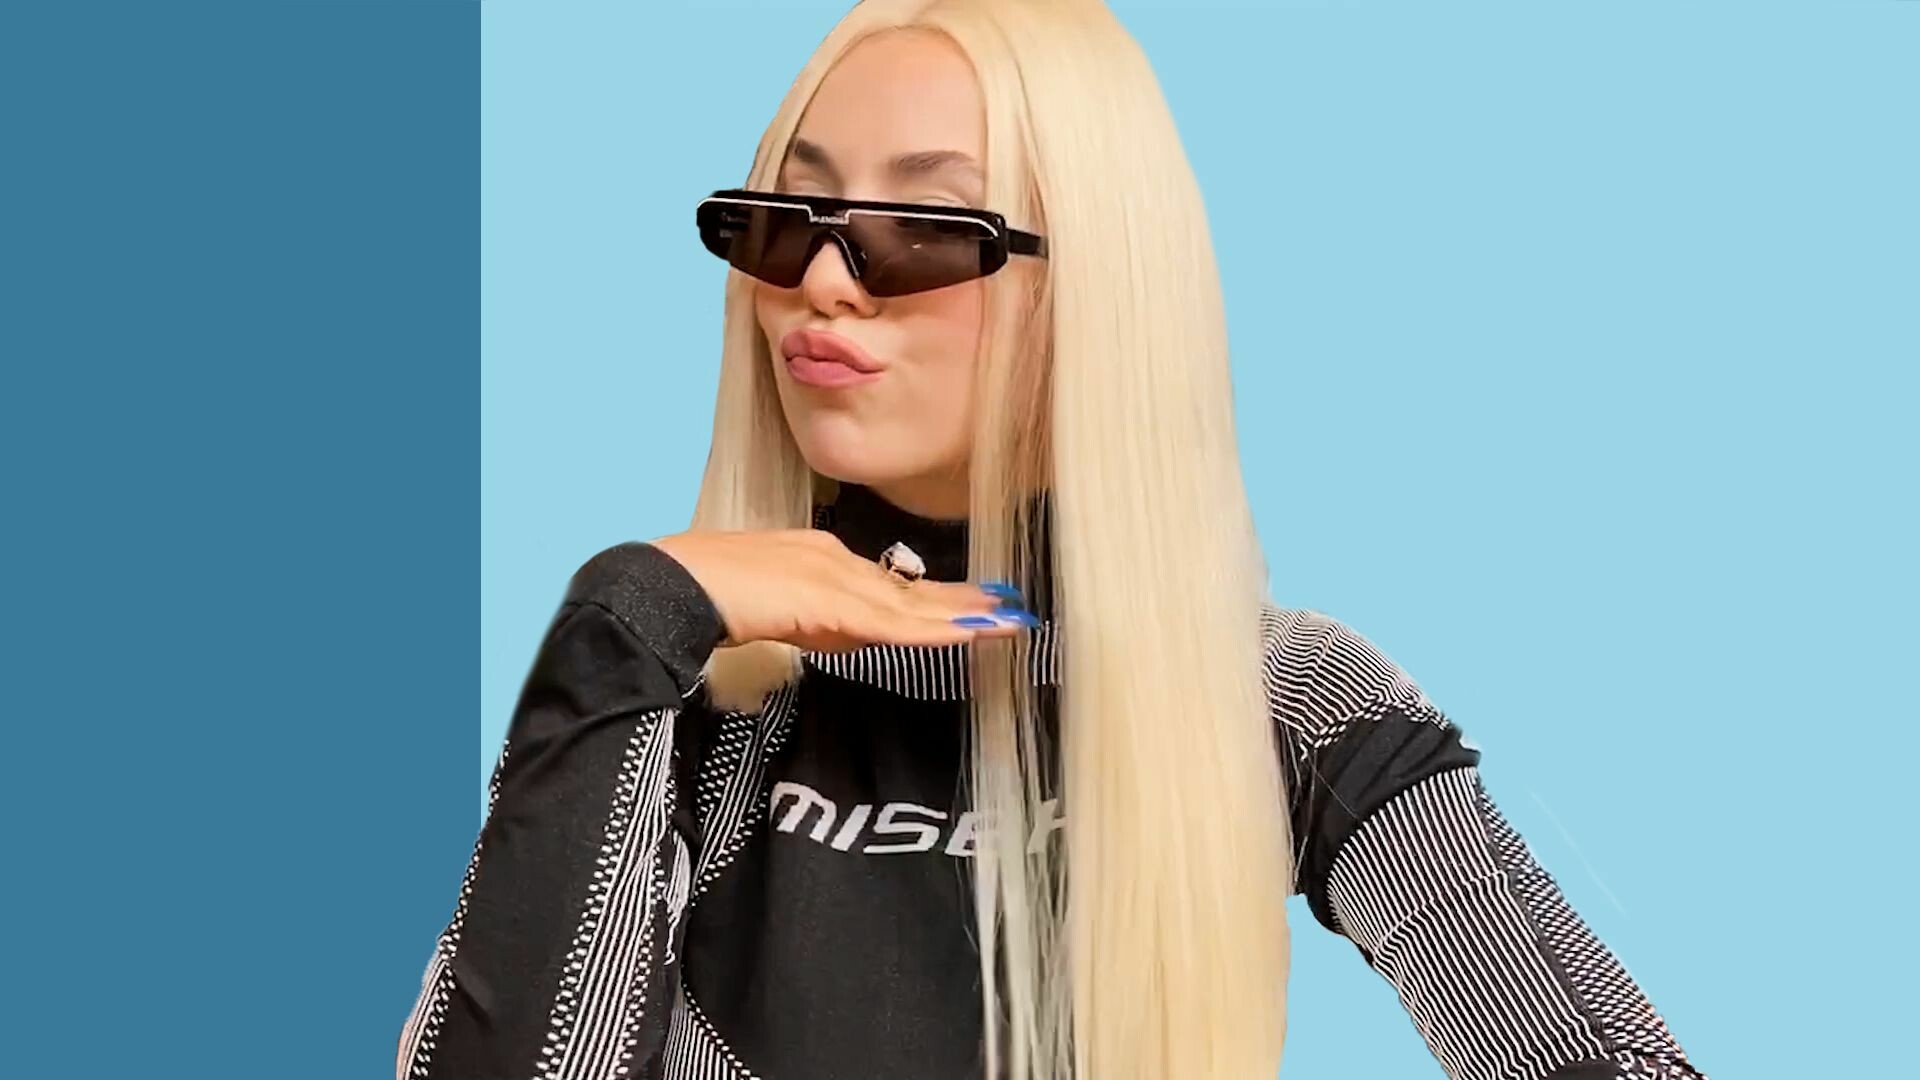 Ava Max: The singer won Best Push Act at the 2019 MTV Europe Music Awards. 1920x1080 Full HD Wallpaper.